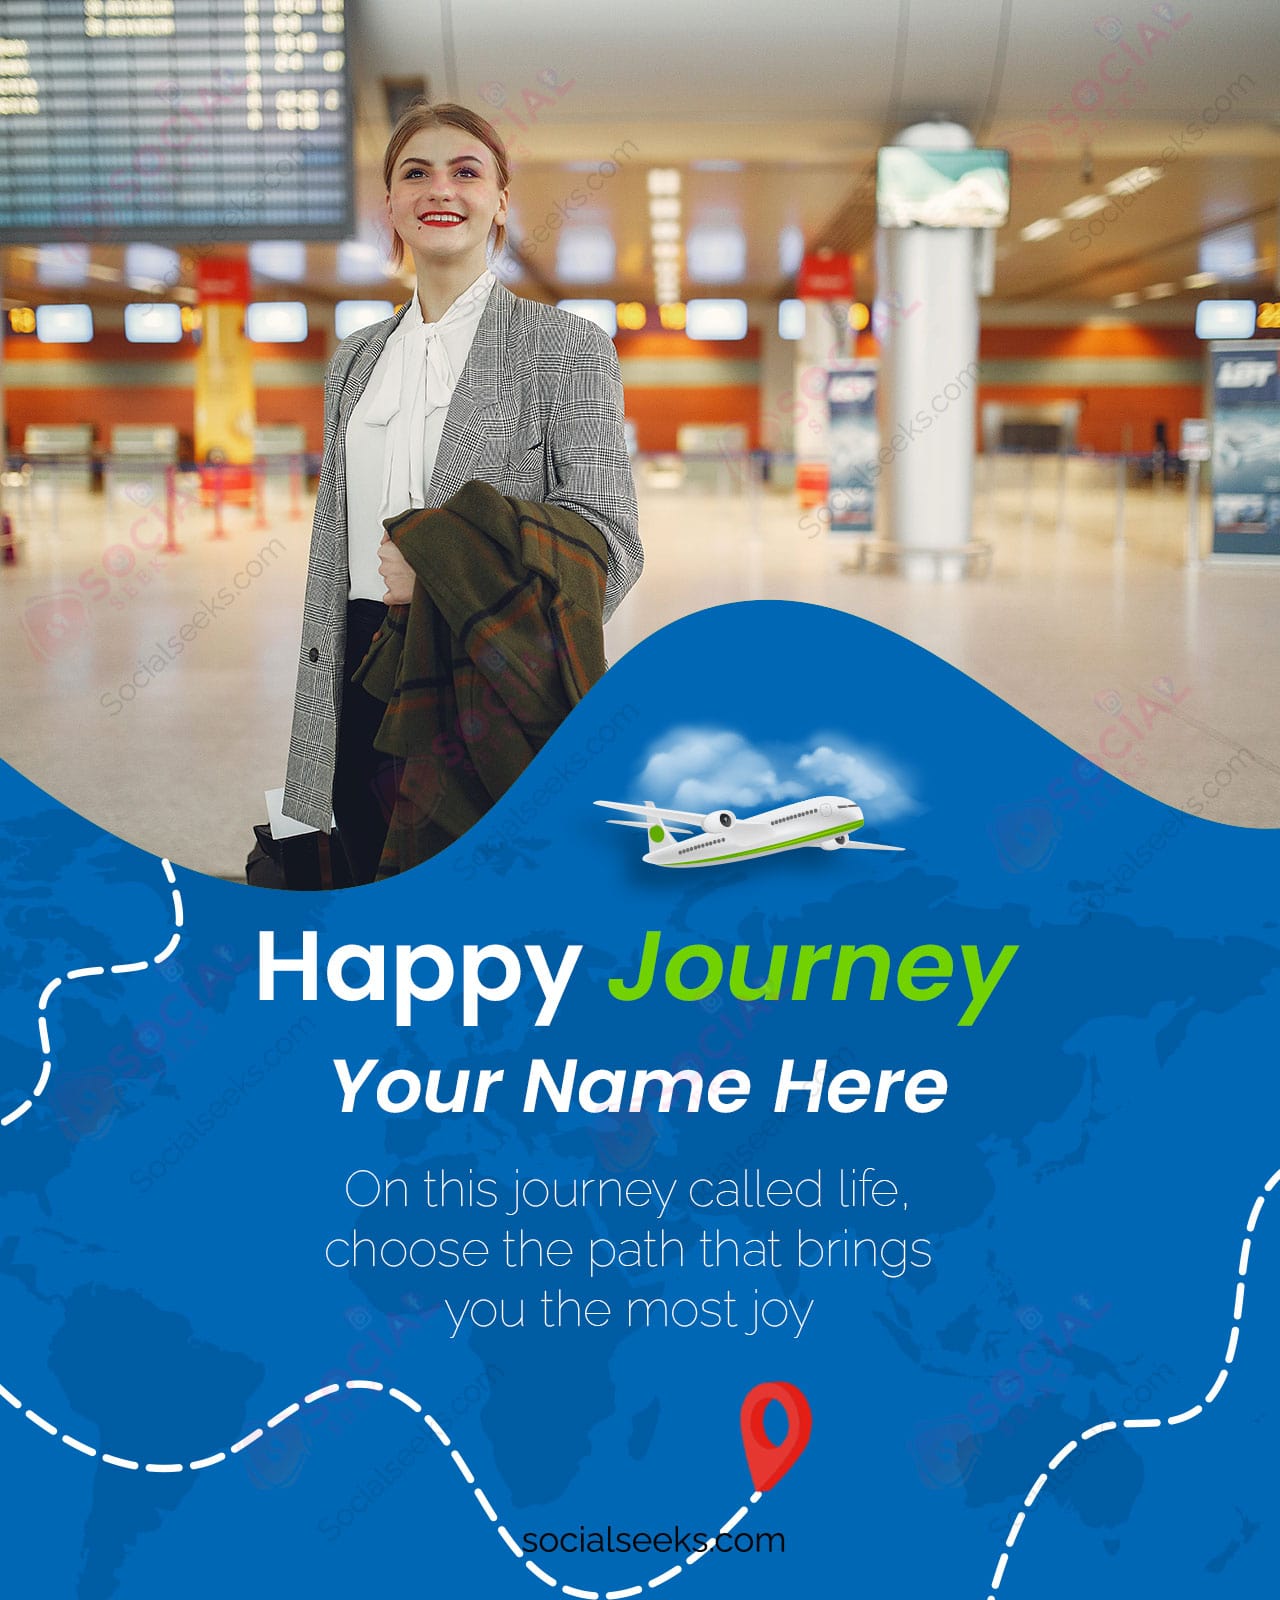 Sending your Safe Journey Customized Wishes to friends and family with photo and name